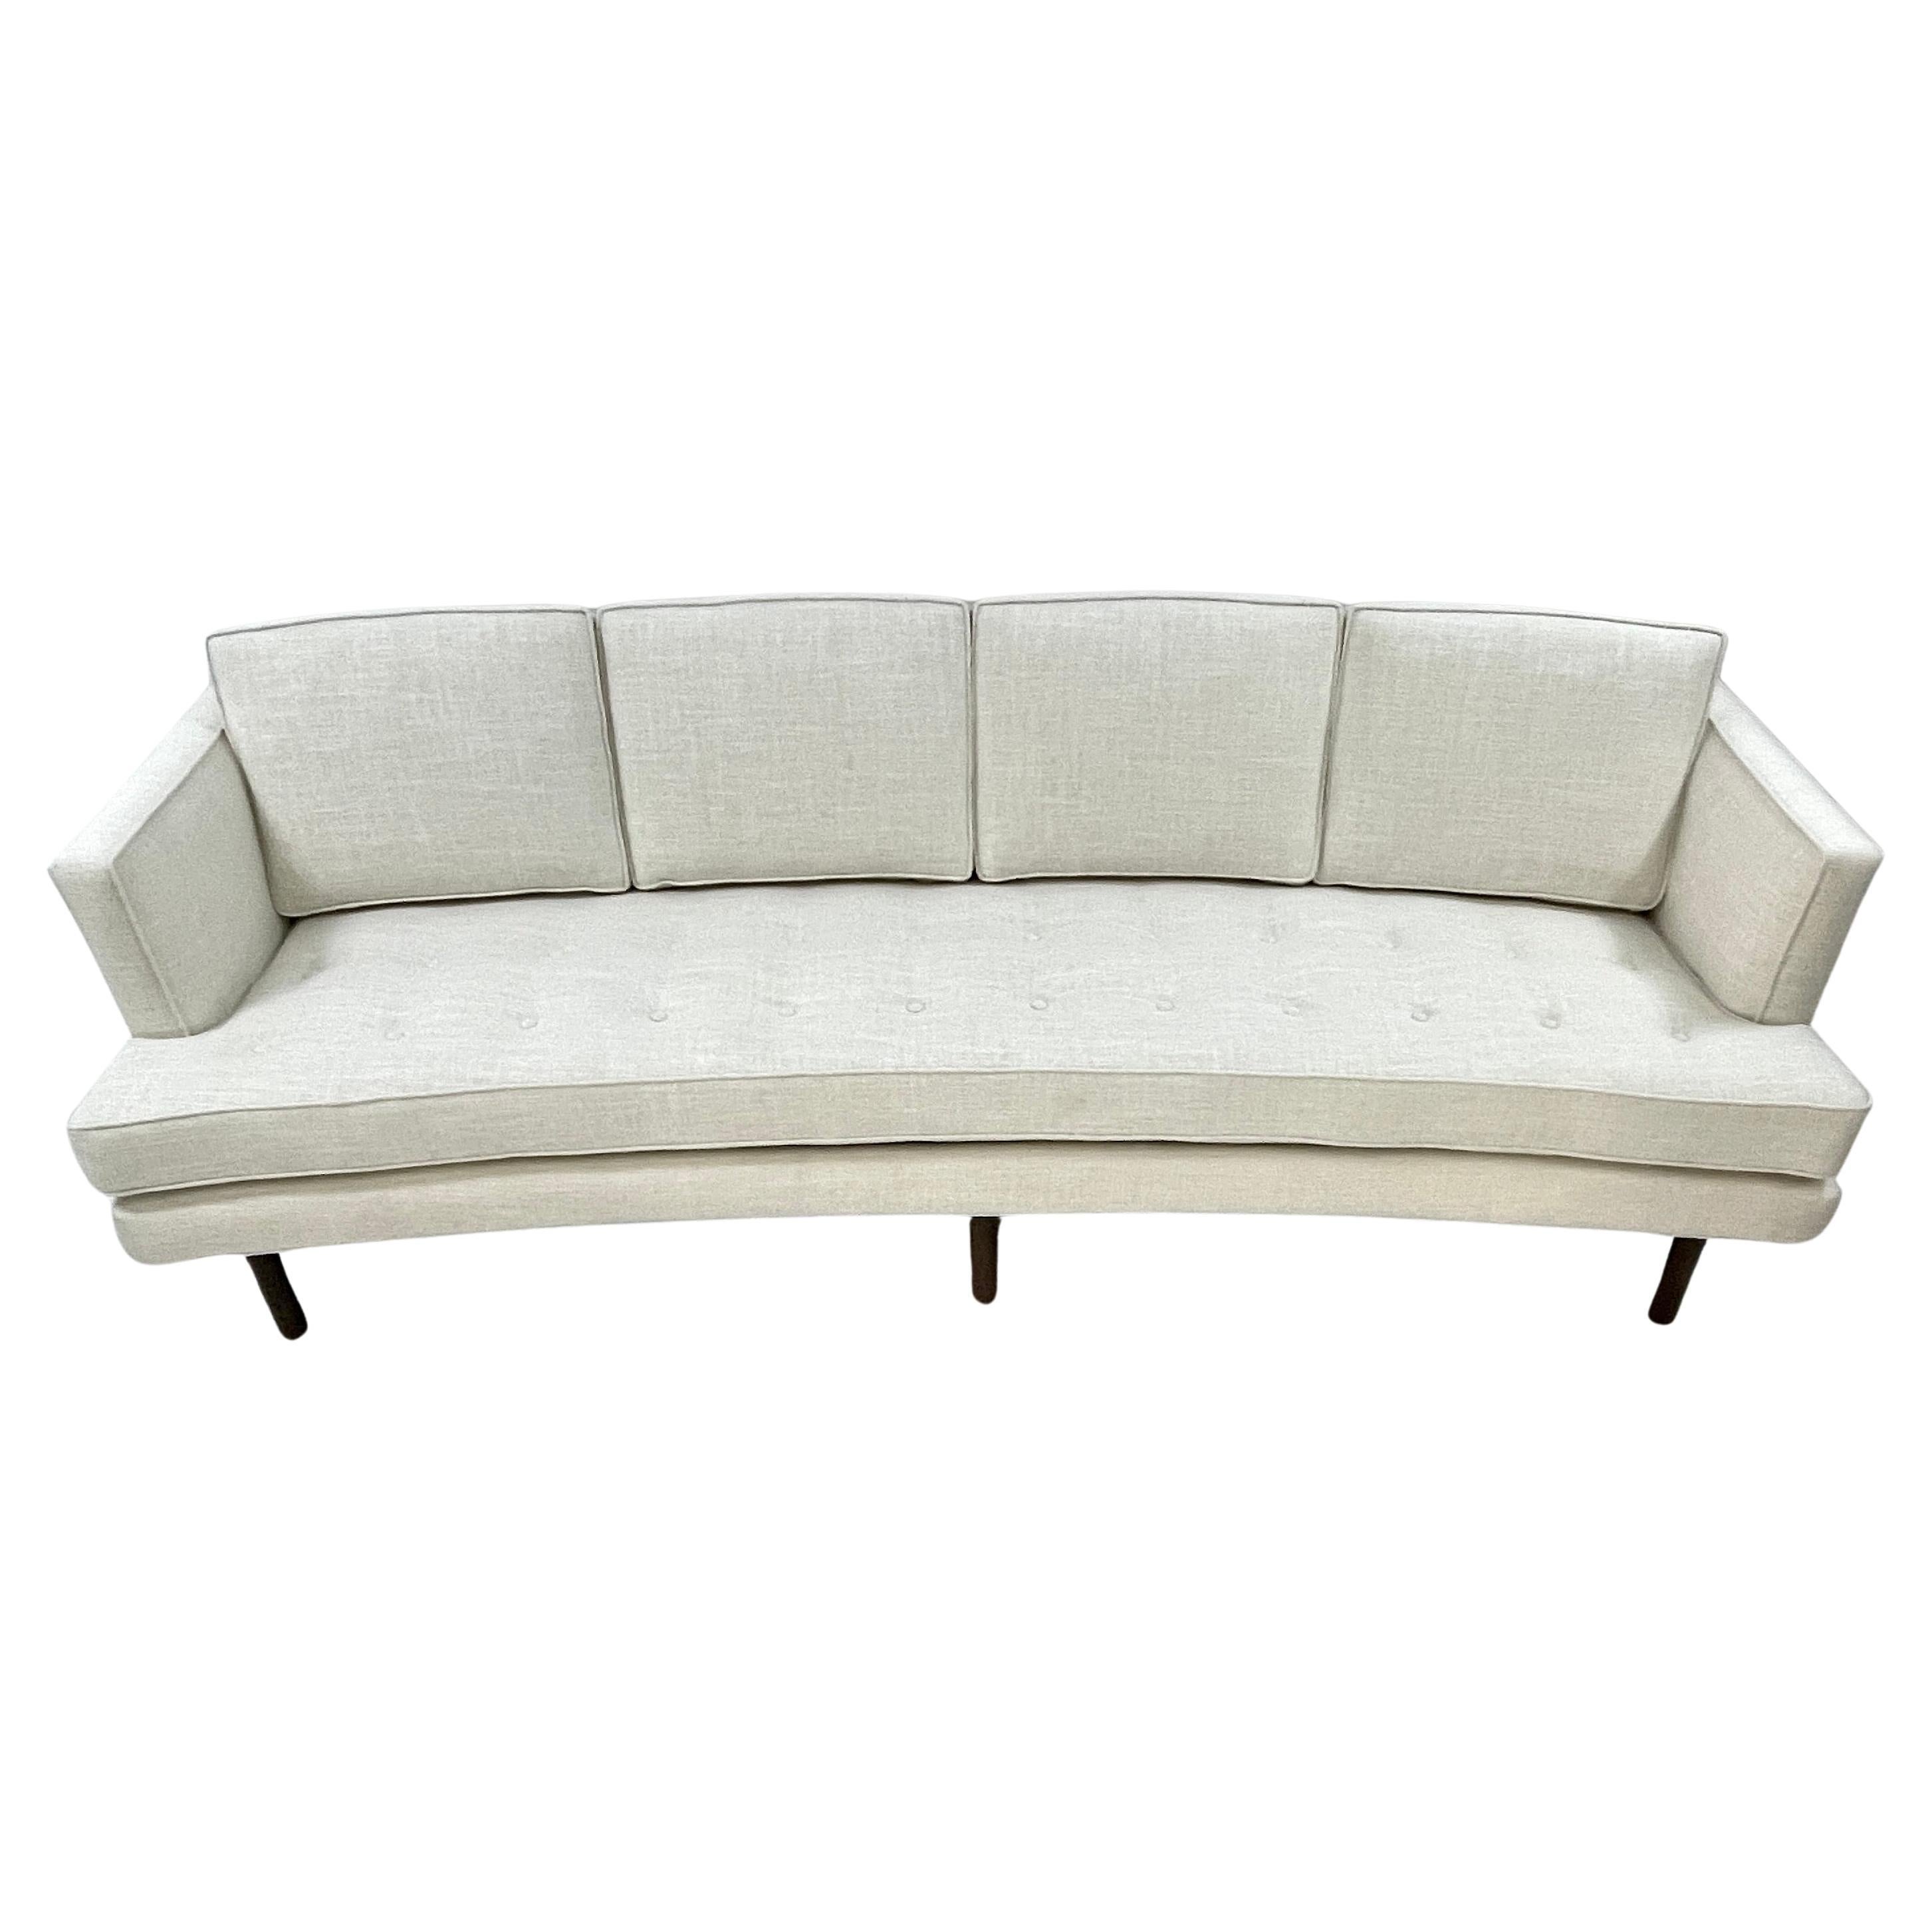 Stunning freshly upholstery Harvey Probber sofa. The upholstery is a modern and sensible cotton blend weave which will wear and clean very well. The overall color reads as a creamy white. The weave closeup is white and tan.
All new cushions make